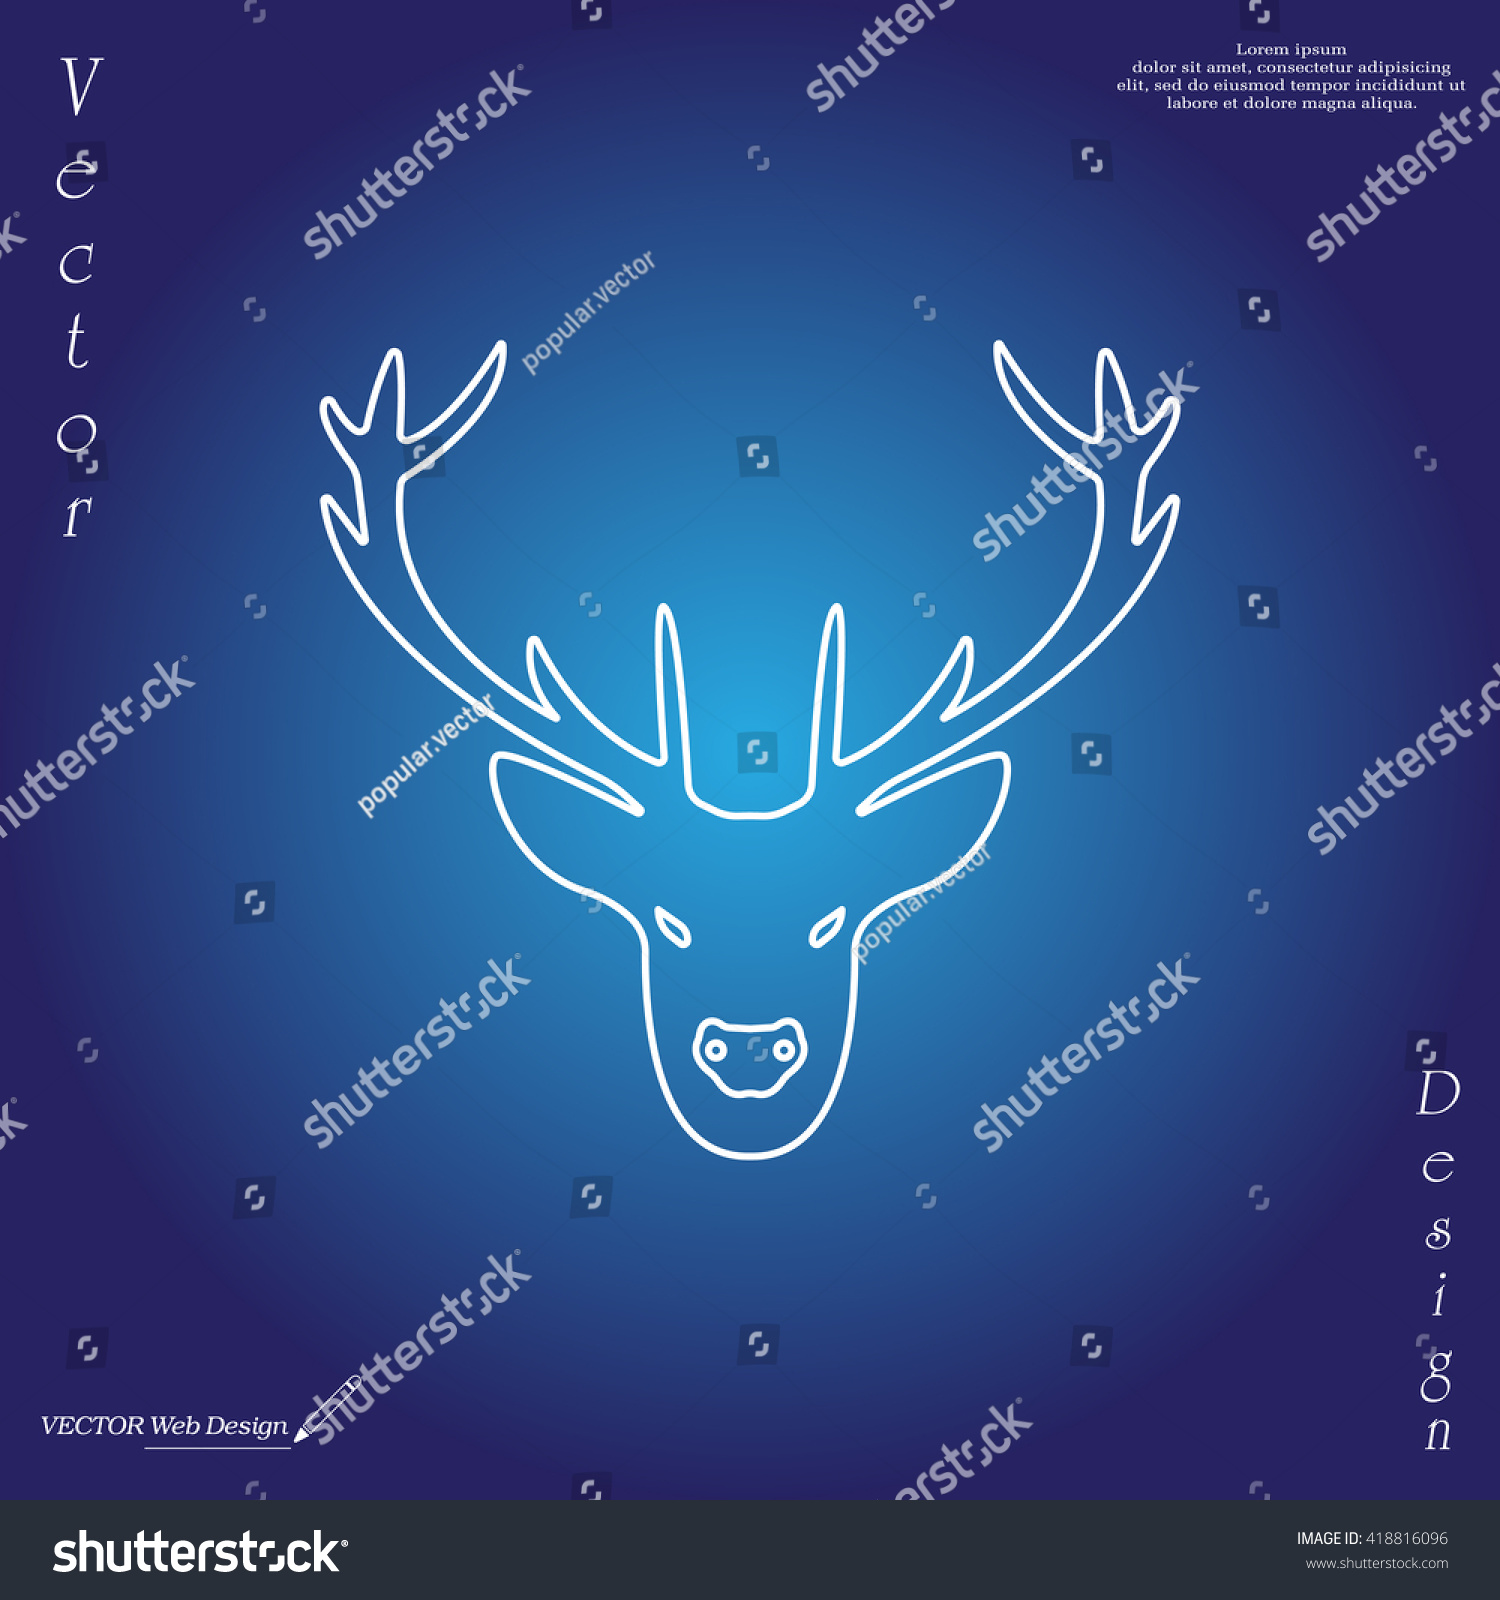 Illustration Of A Deer Head Silhouette Line Royalty Free Stock Vector 418816096 1626